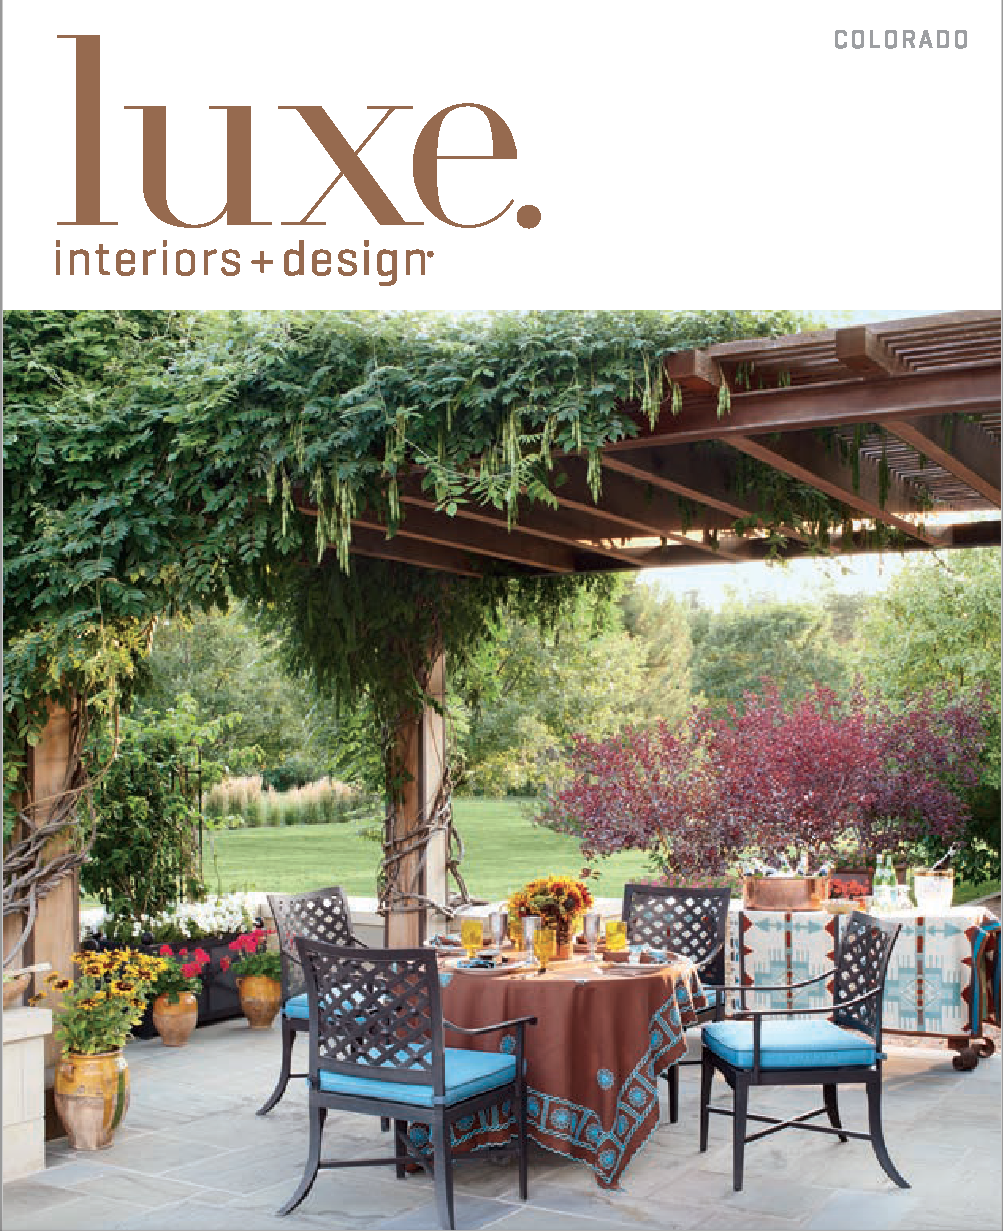    Luxe Magazine May/June 2020: “Trends in Renovation I Colorado”   